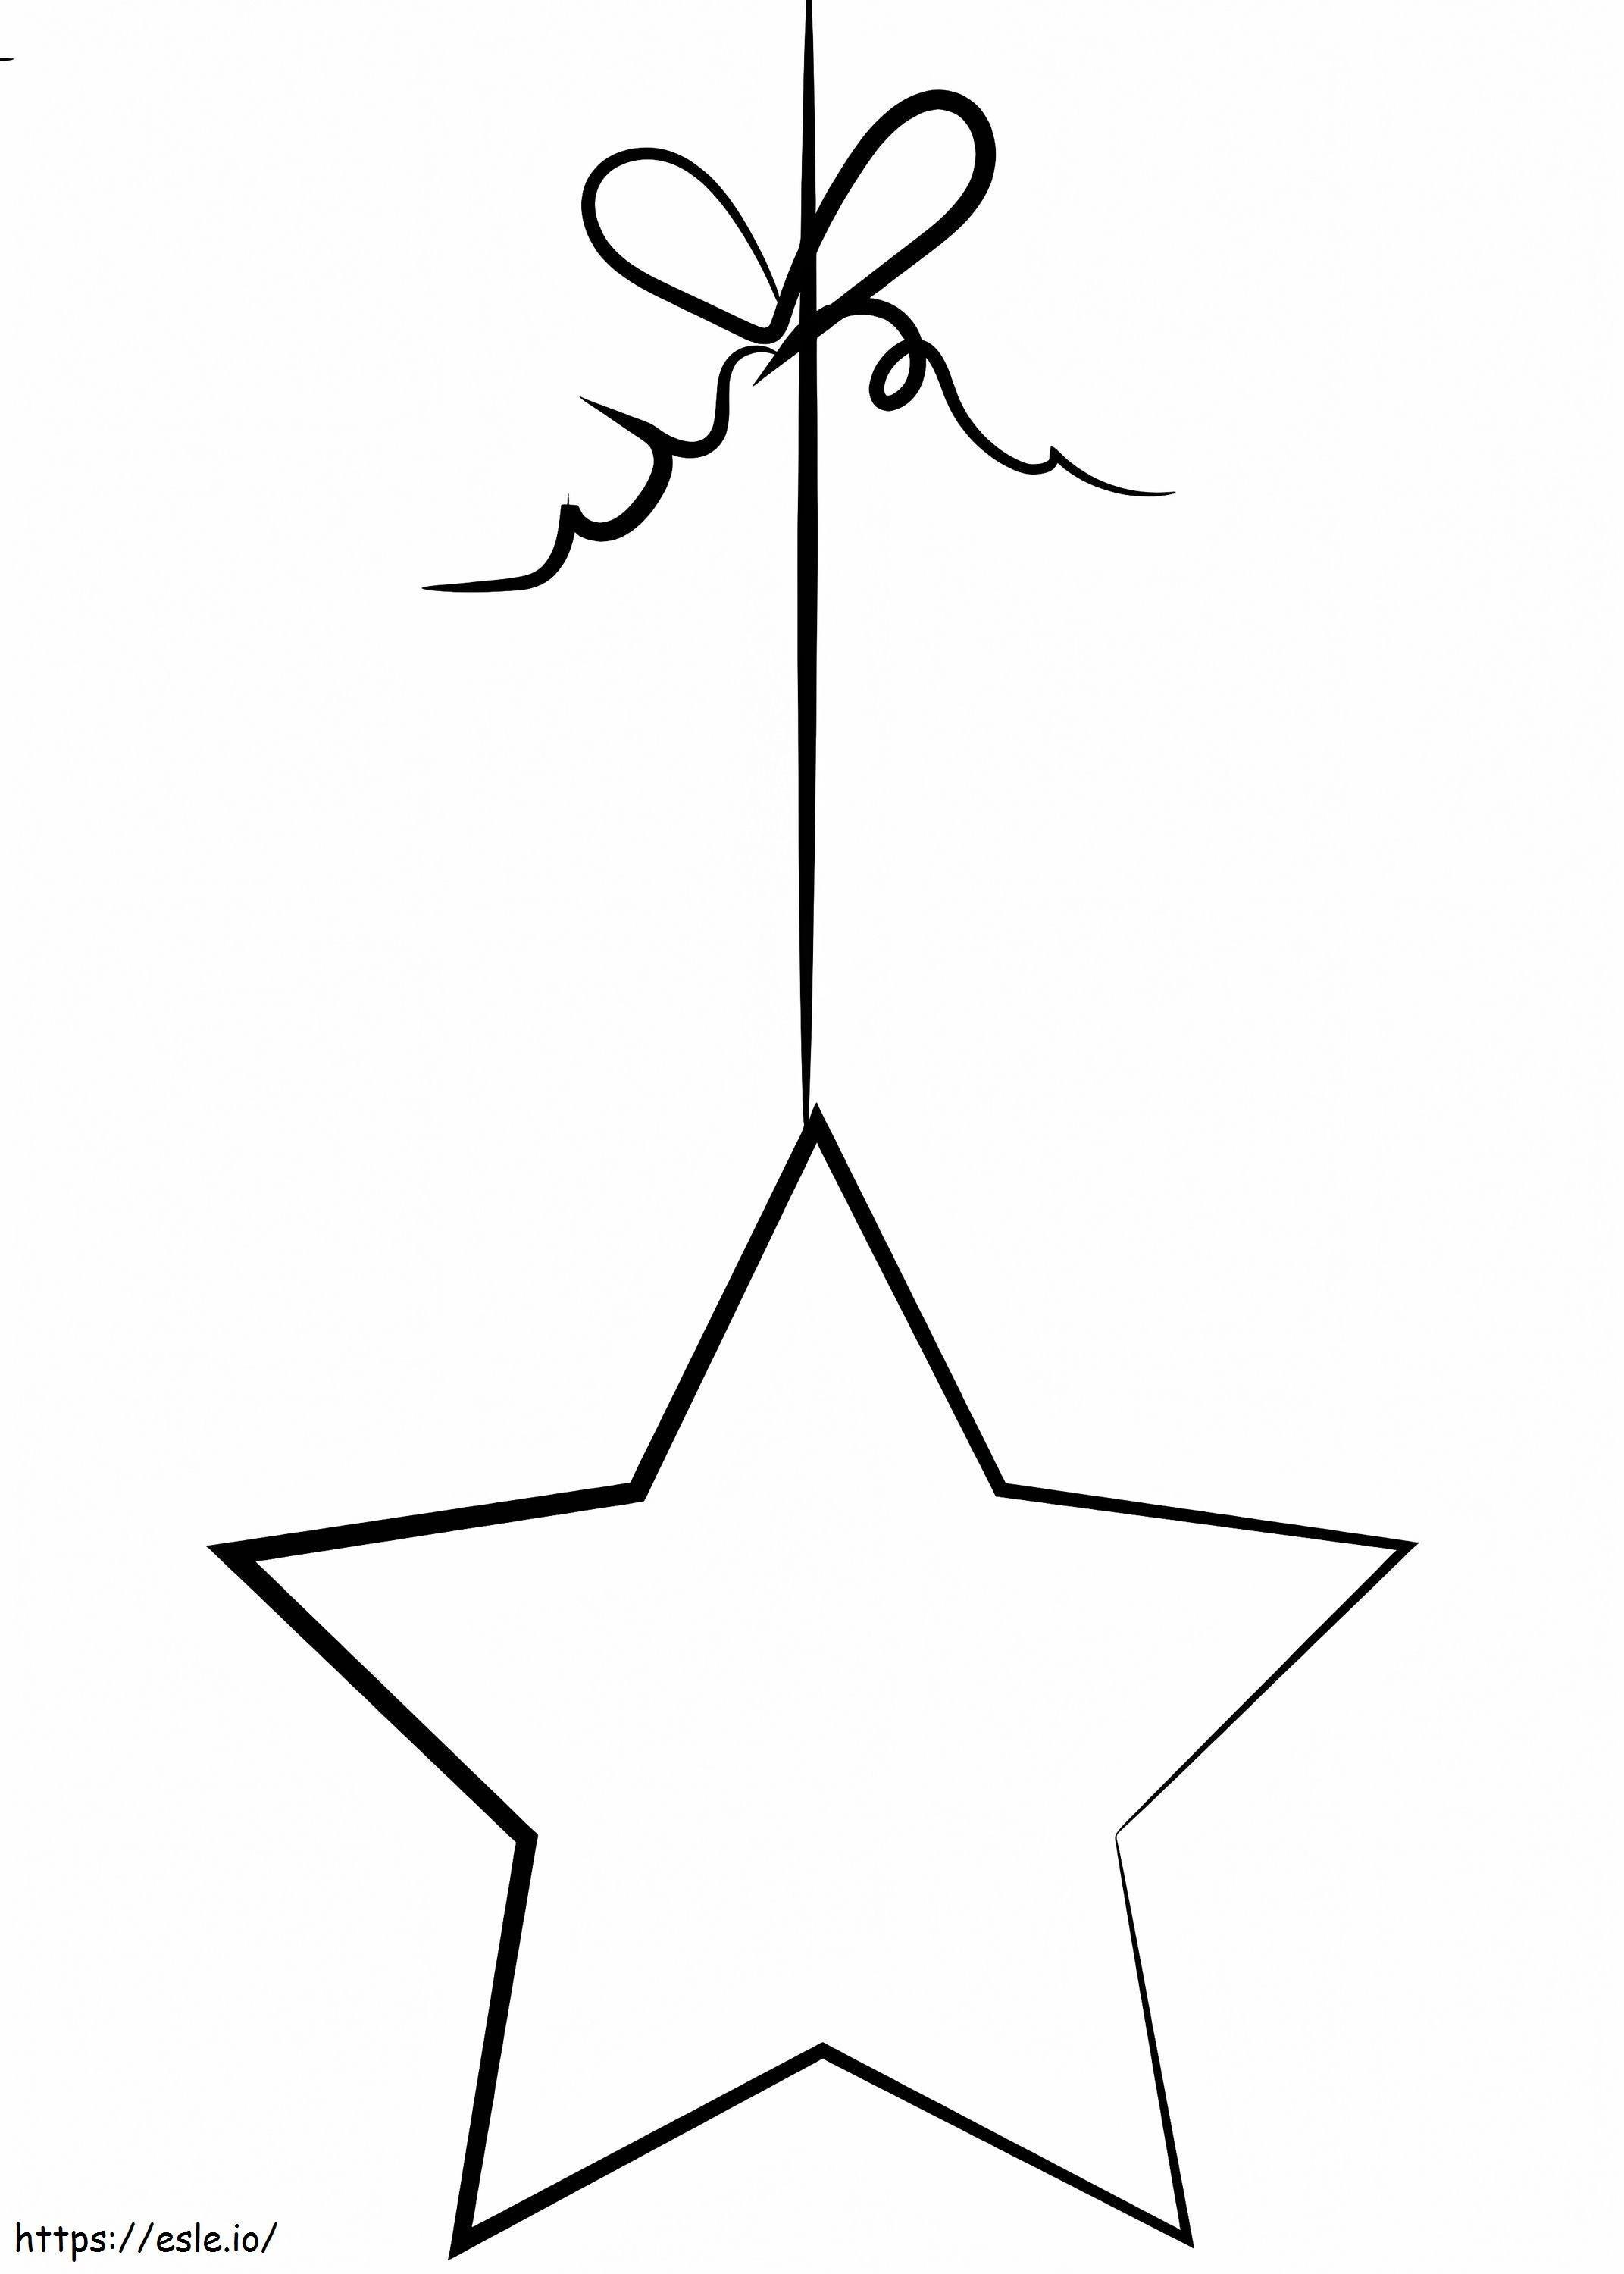 Star Ornament coloring page